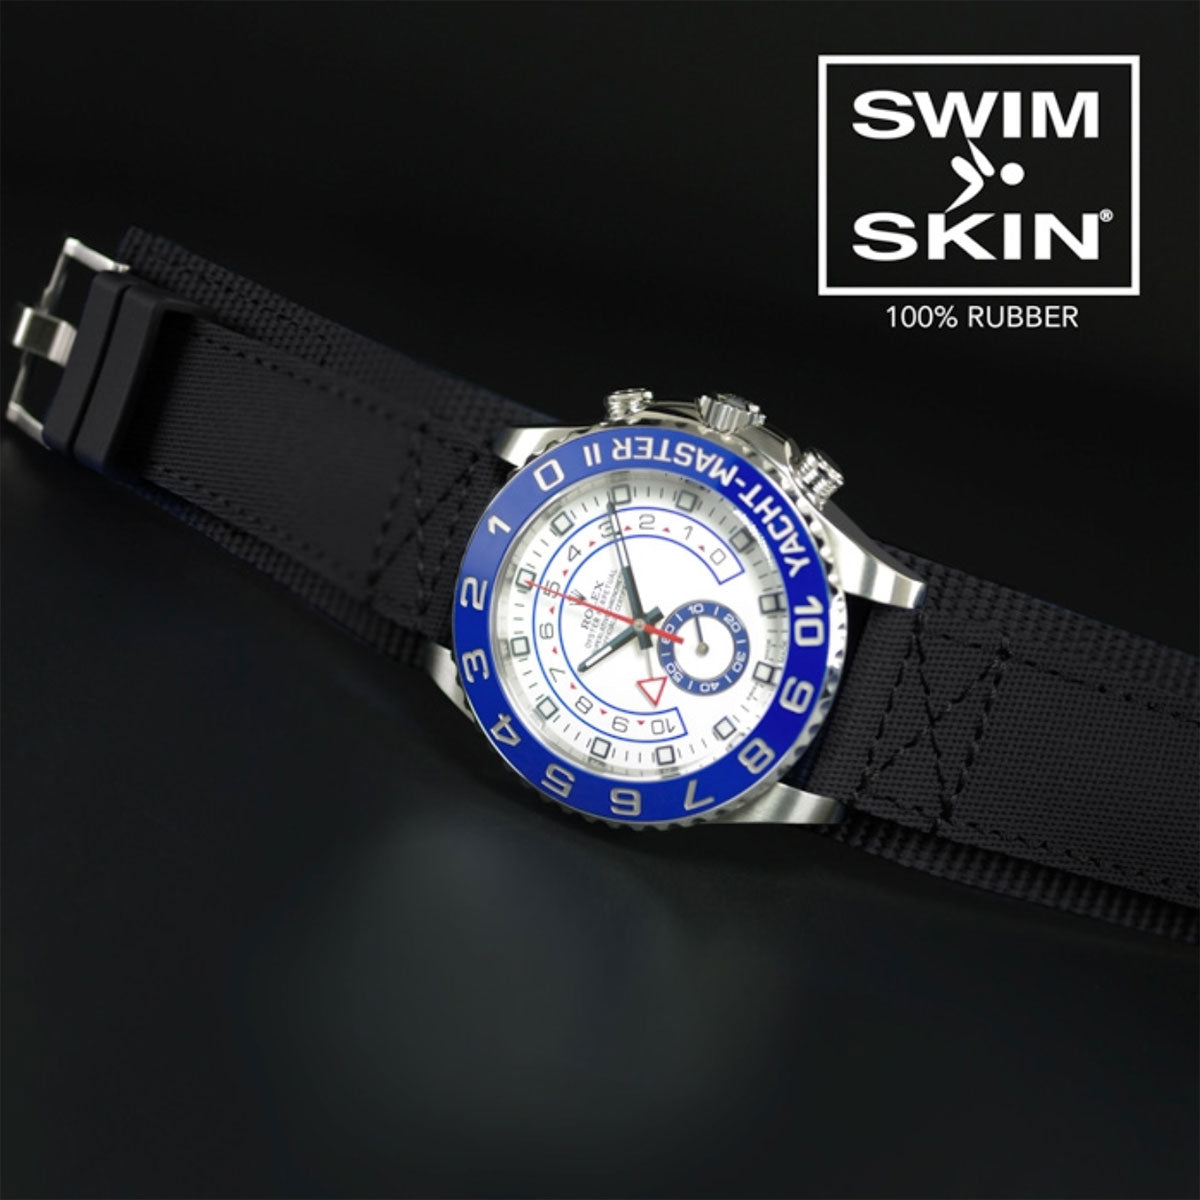 yachtmaster 2 rubber strap